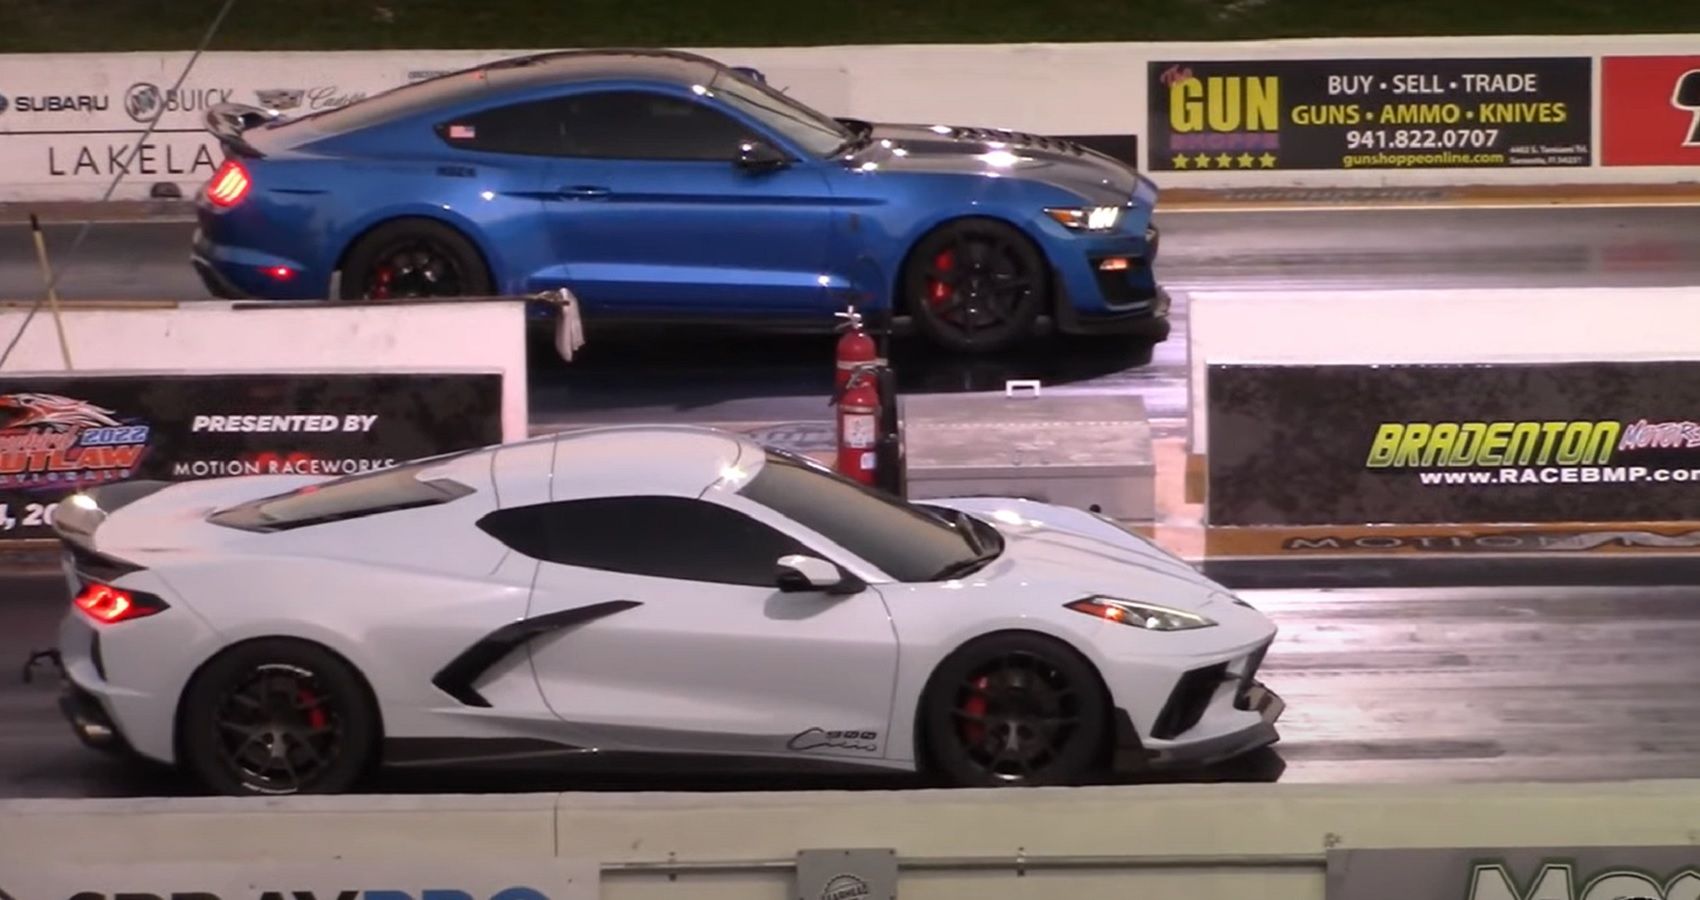 Blue Twin Turbo Ford Mustang Shelby GT500 Versus white Twin Turbo C8 Chevrolet Corvette Stingray